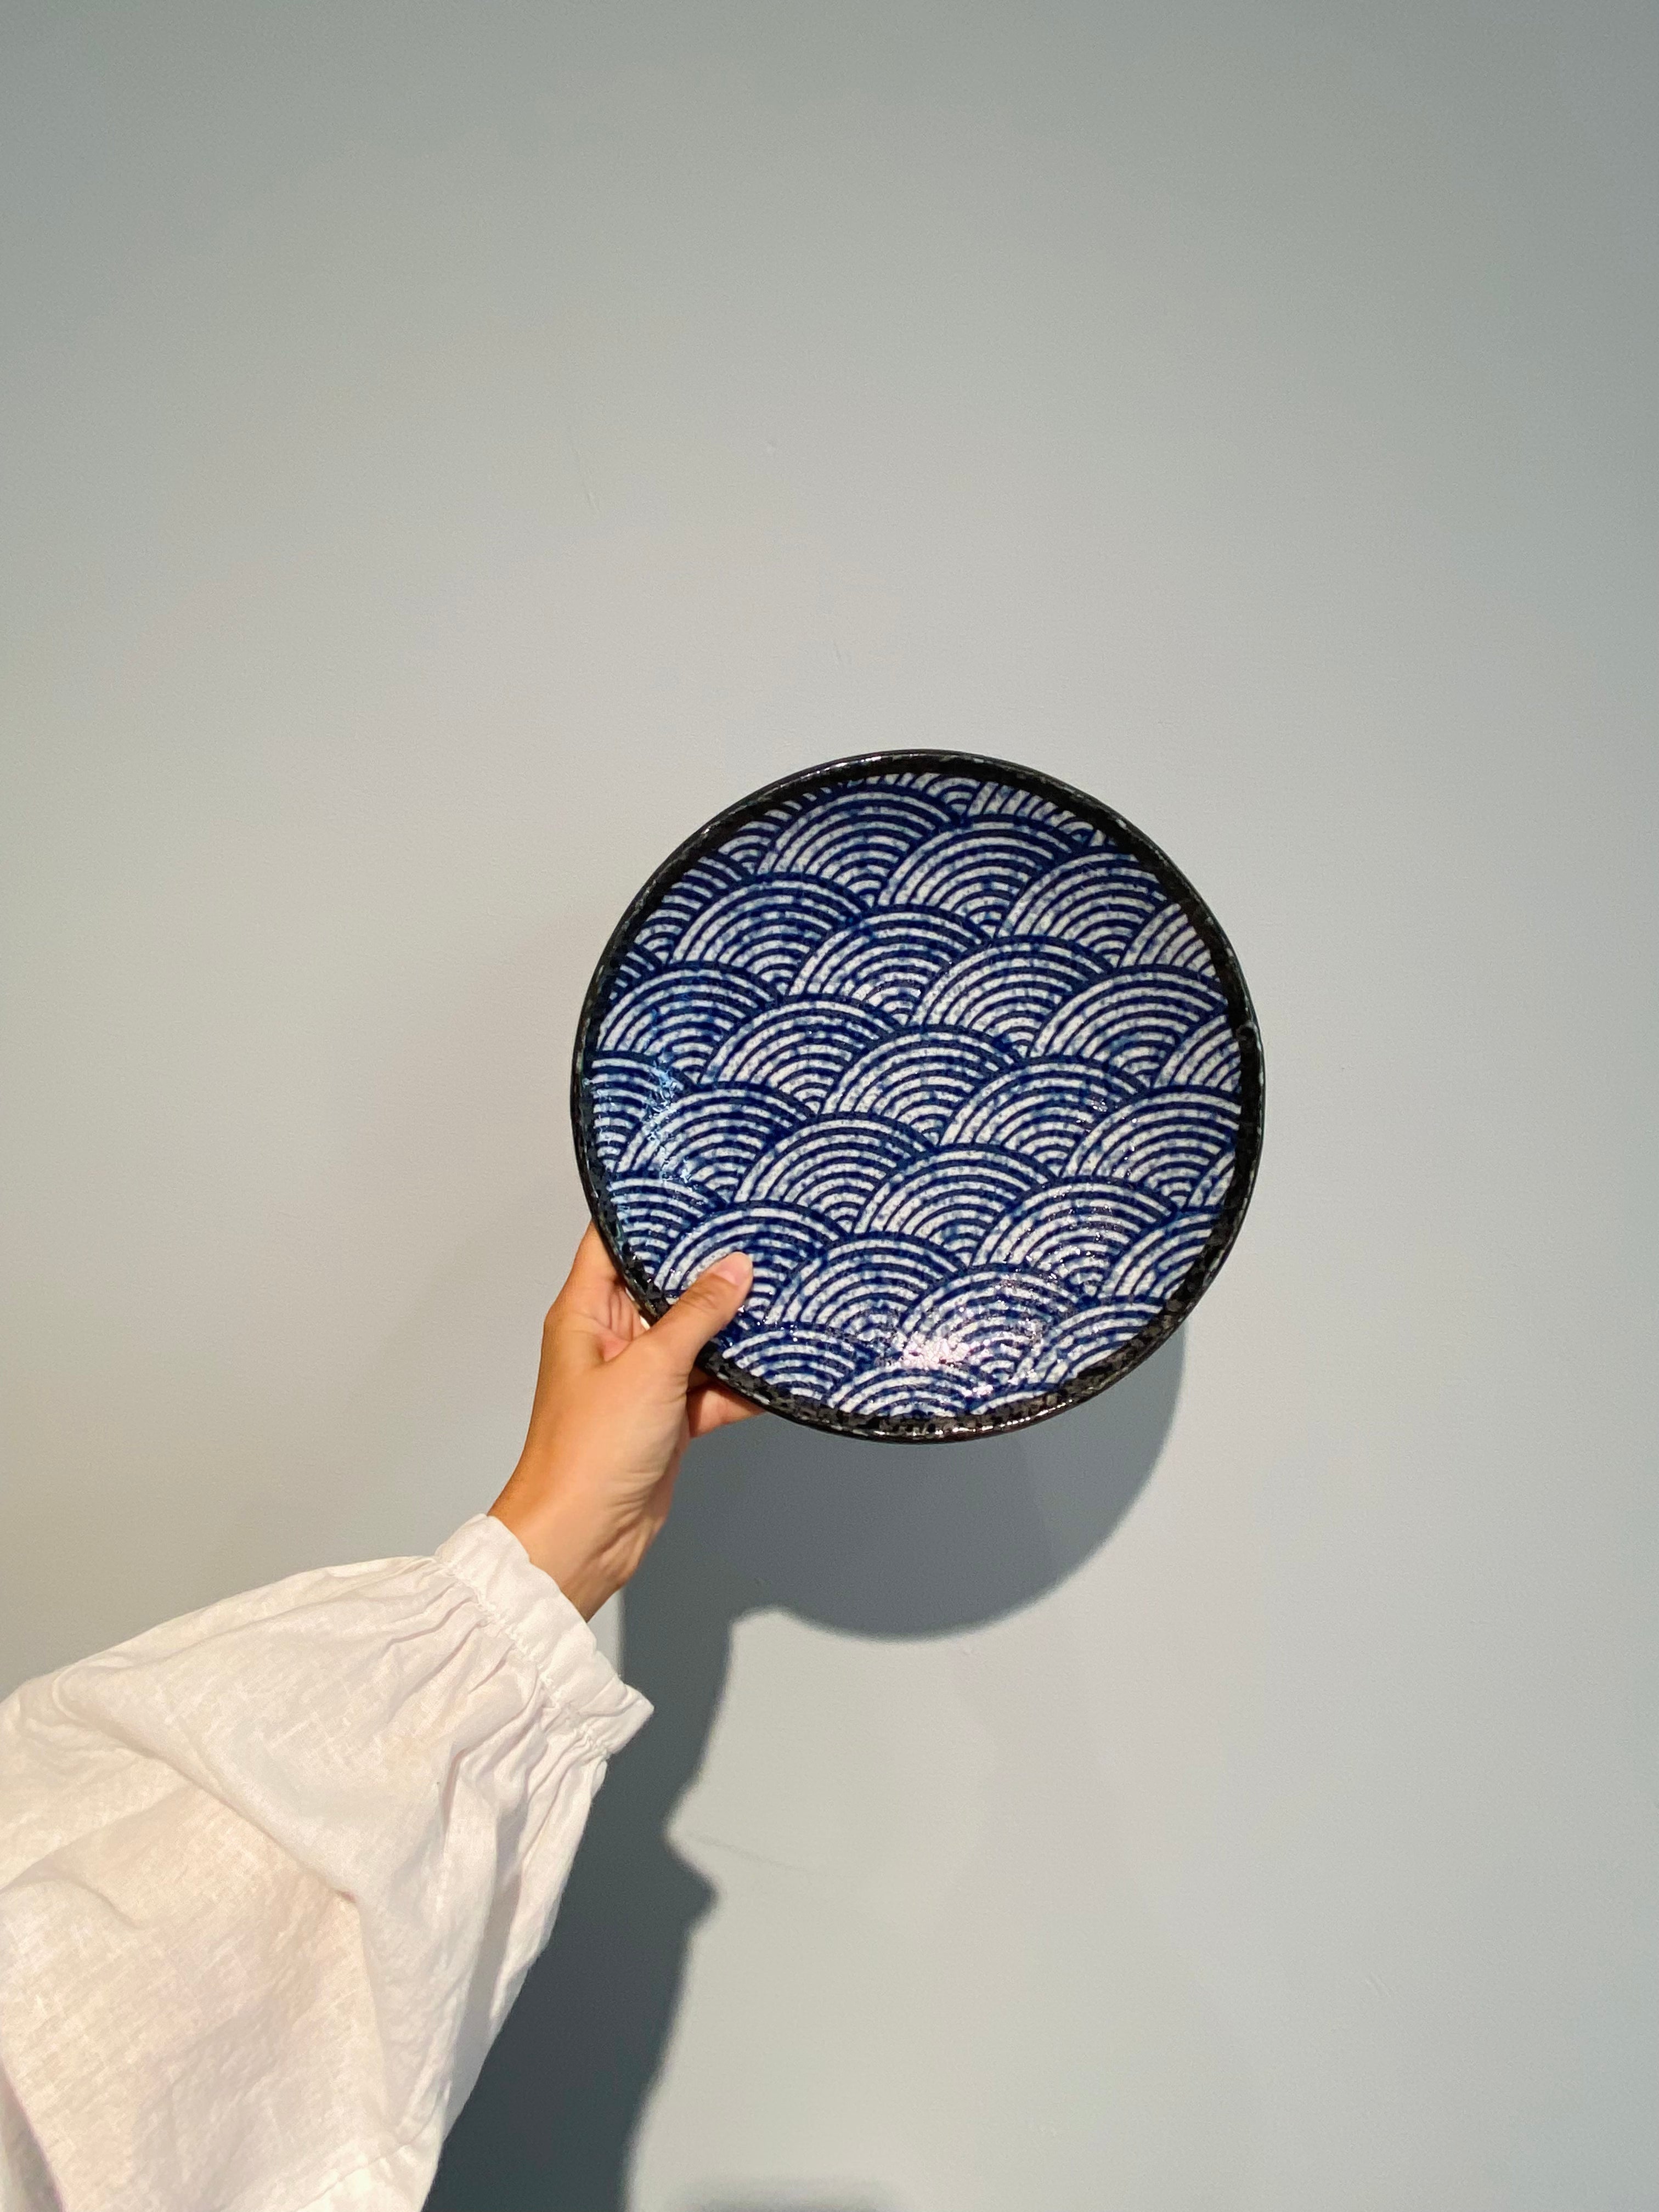 Blue plate with waves, large